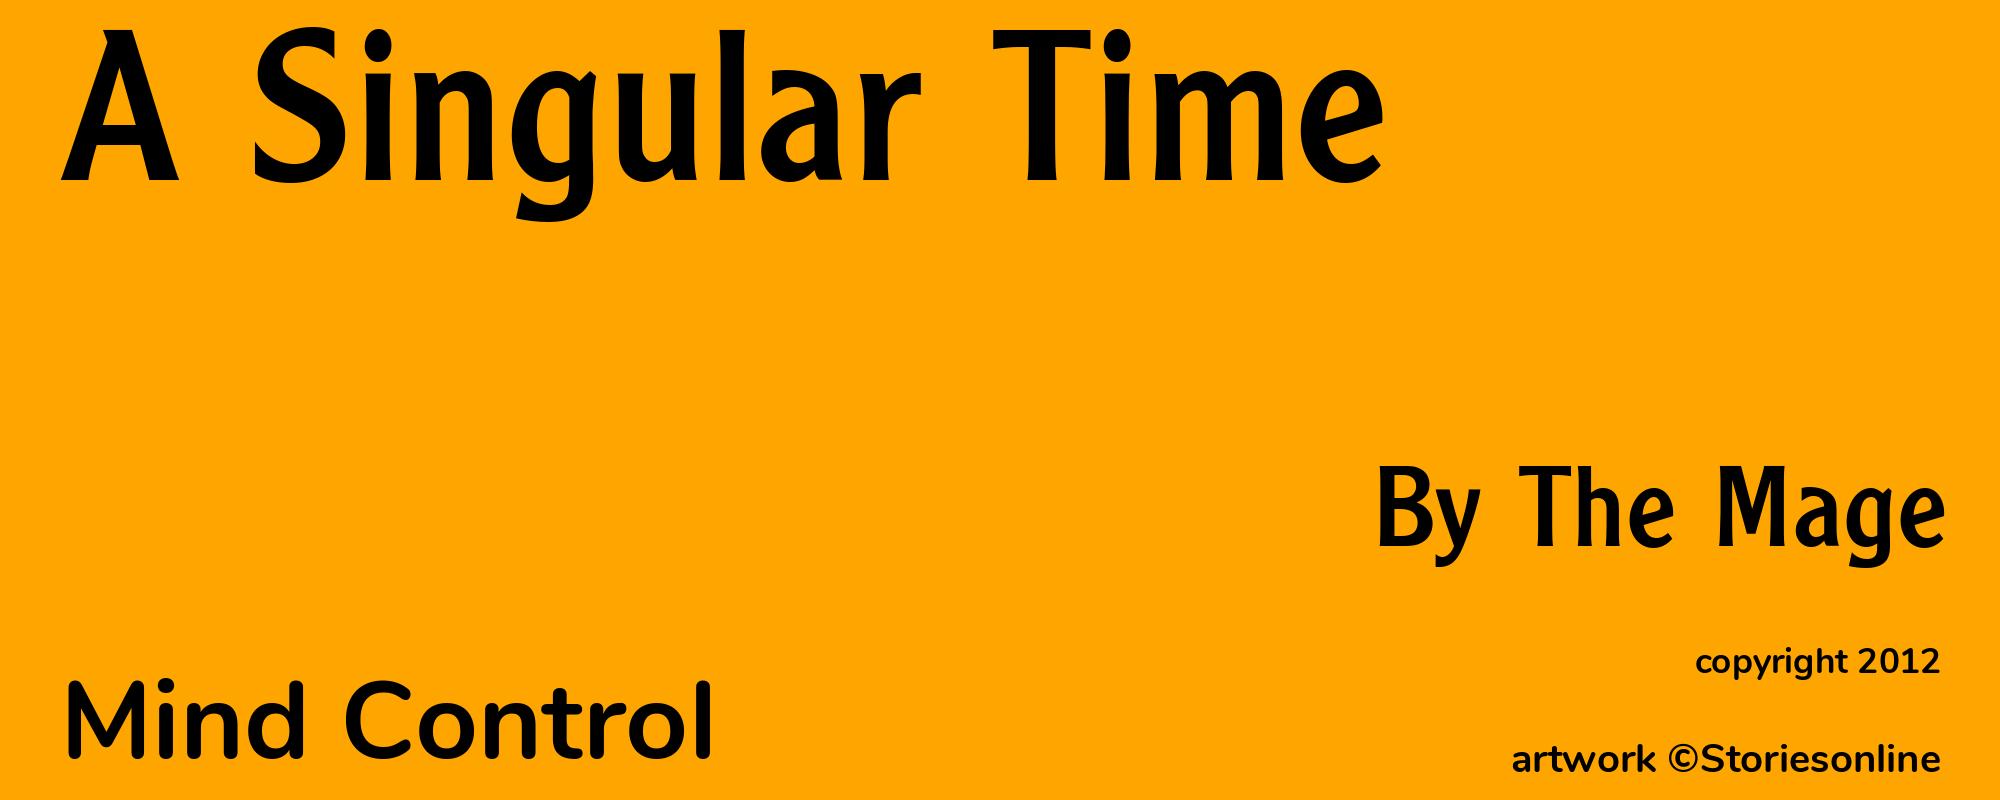 A Singular Time - Cover